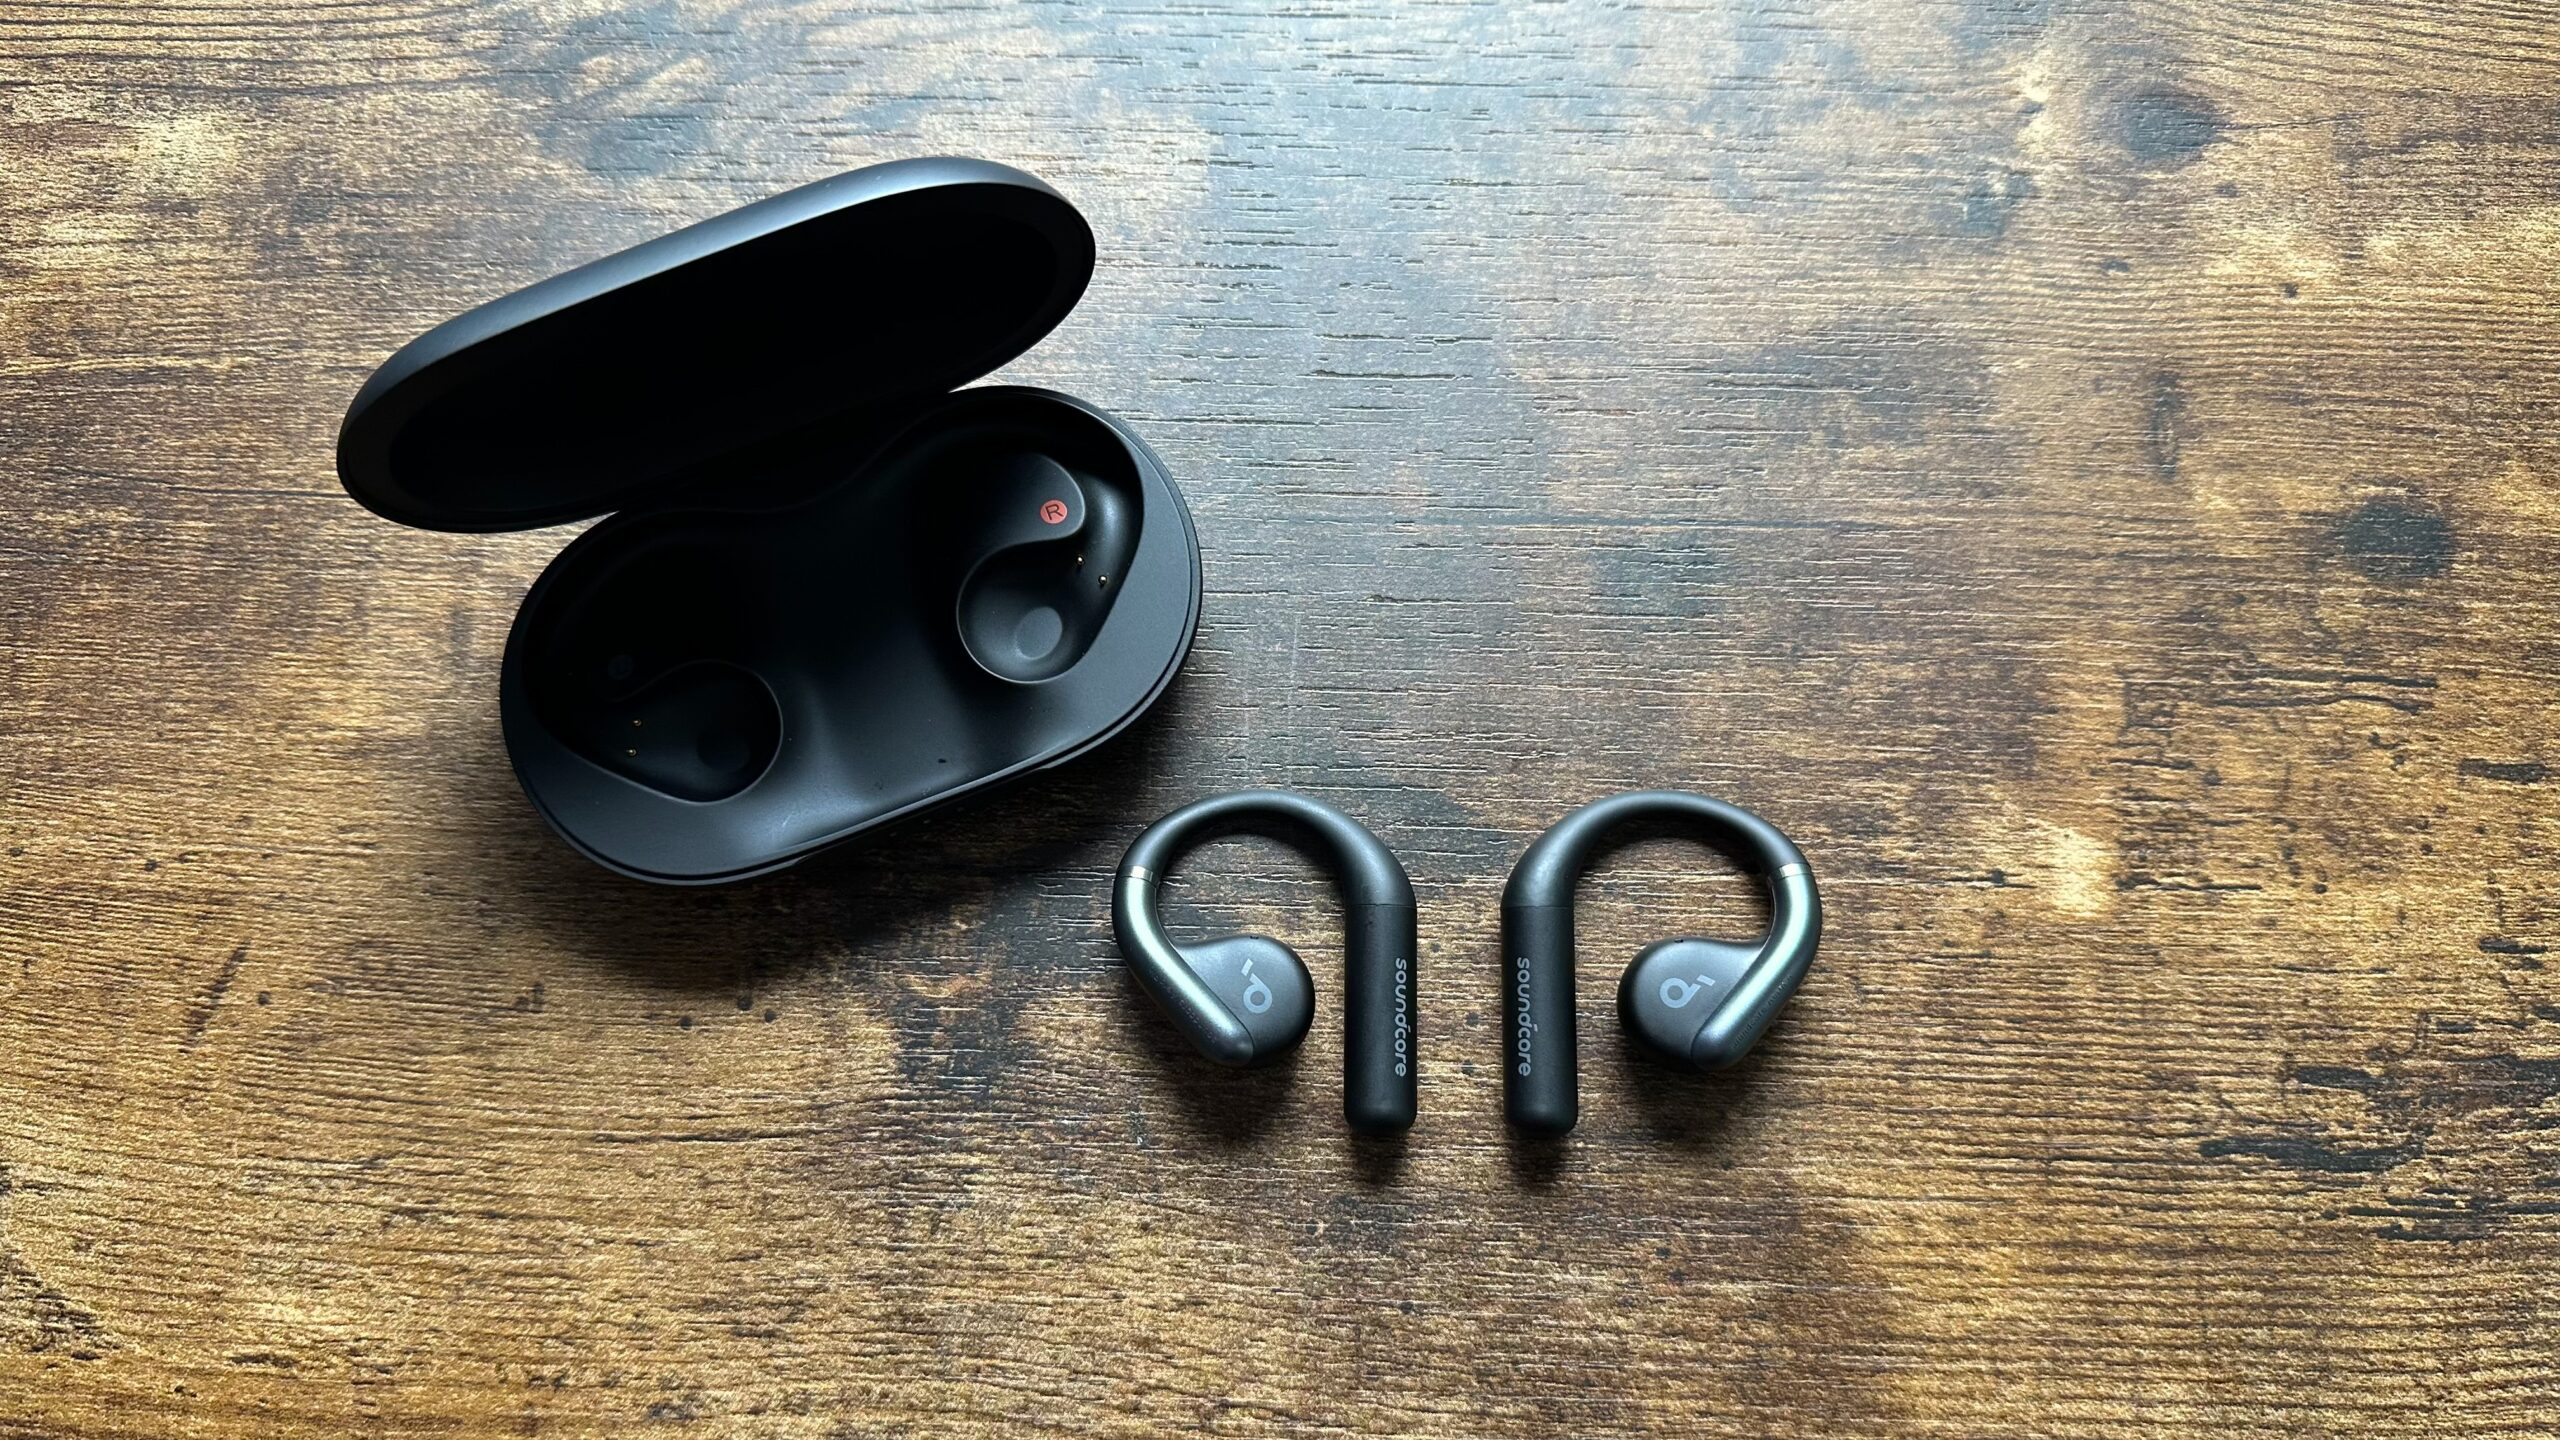 The AeroFit earbuds and charging case.